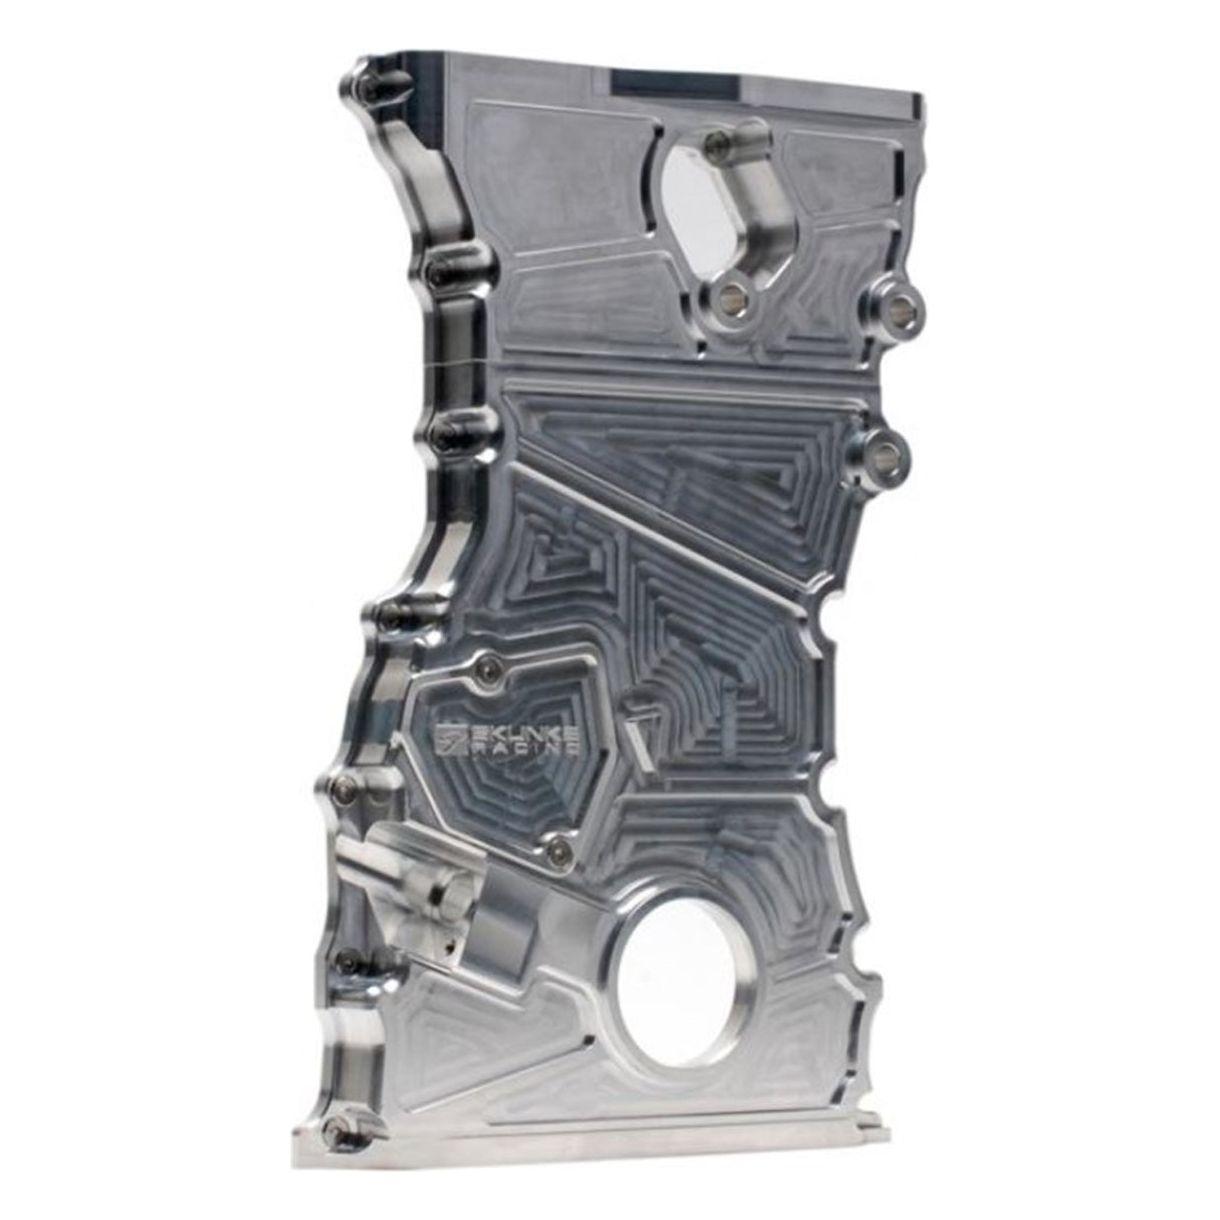 Skunk2 Honda/Acura K-Series (K24 Only) Raw Anodized Timing Chain Cover - SMINKpower Performance Parts SKK681-05-4211 Skunk2 Racing